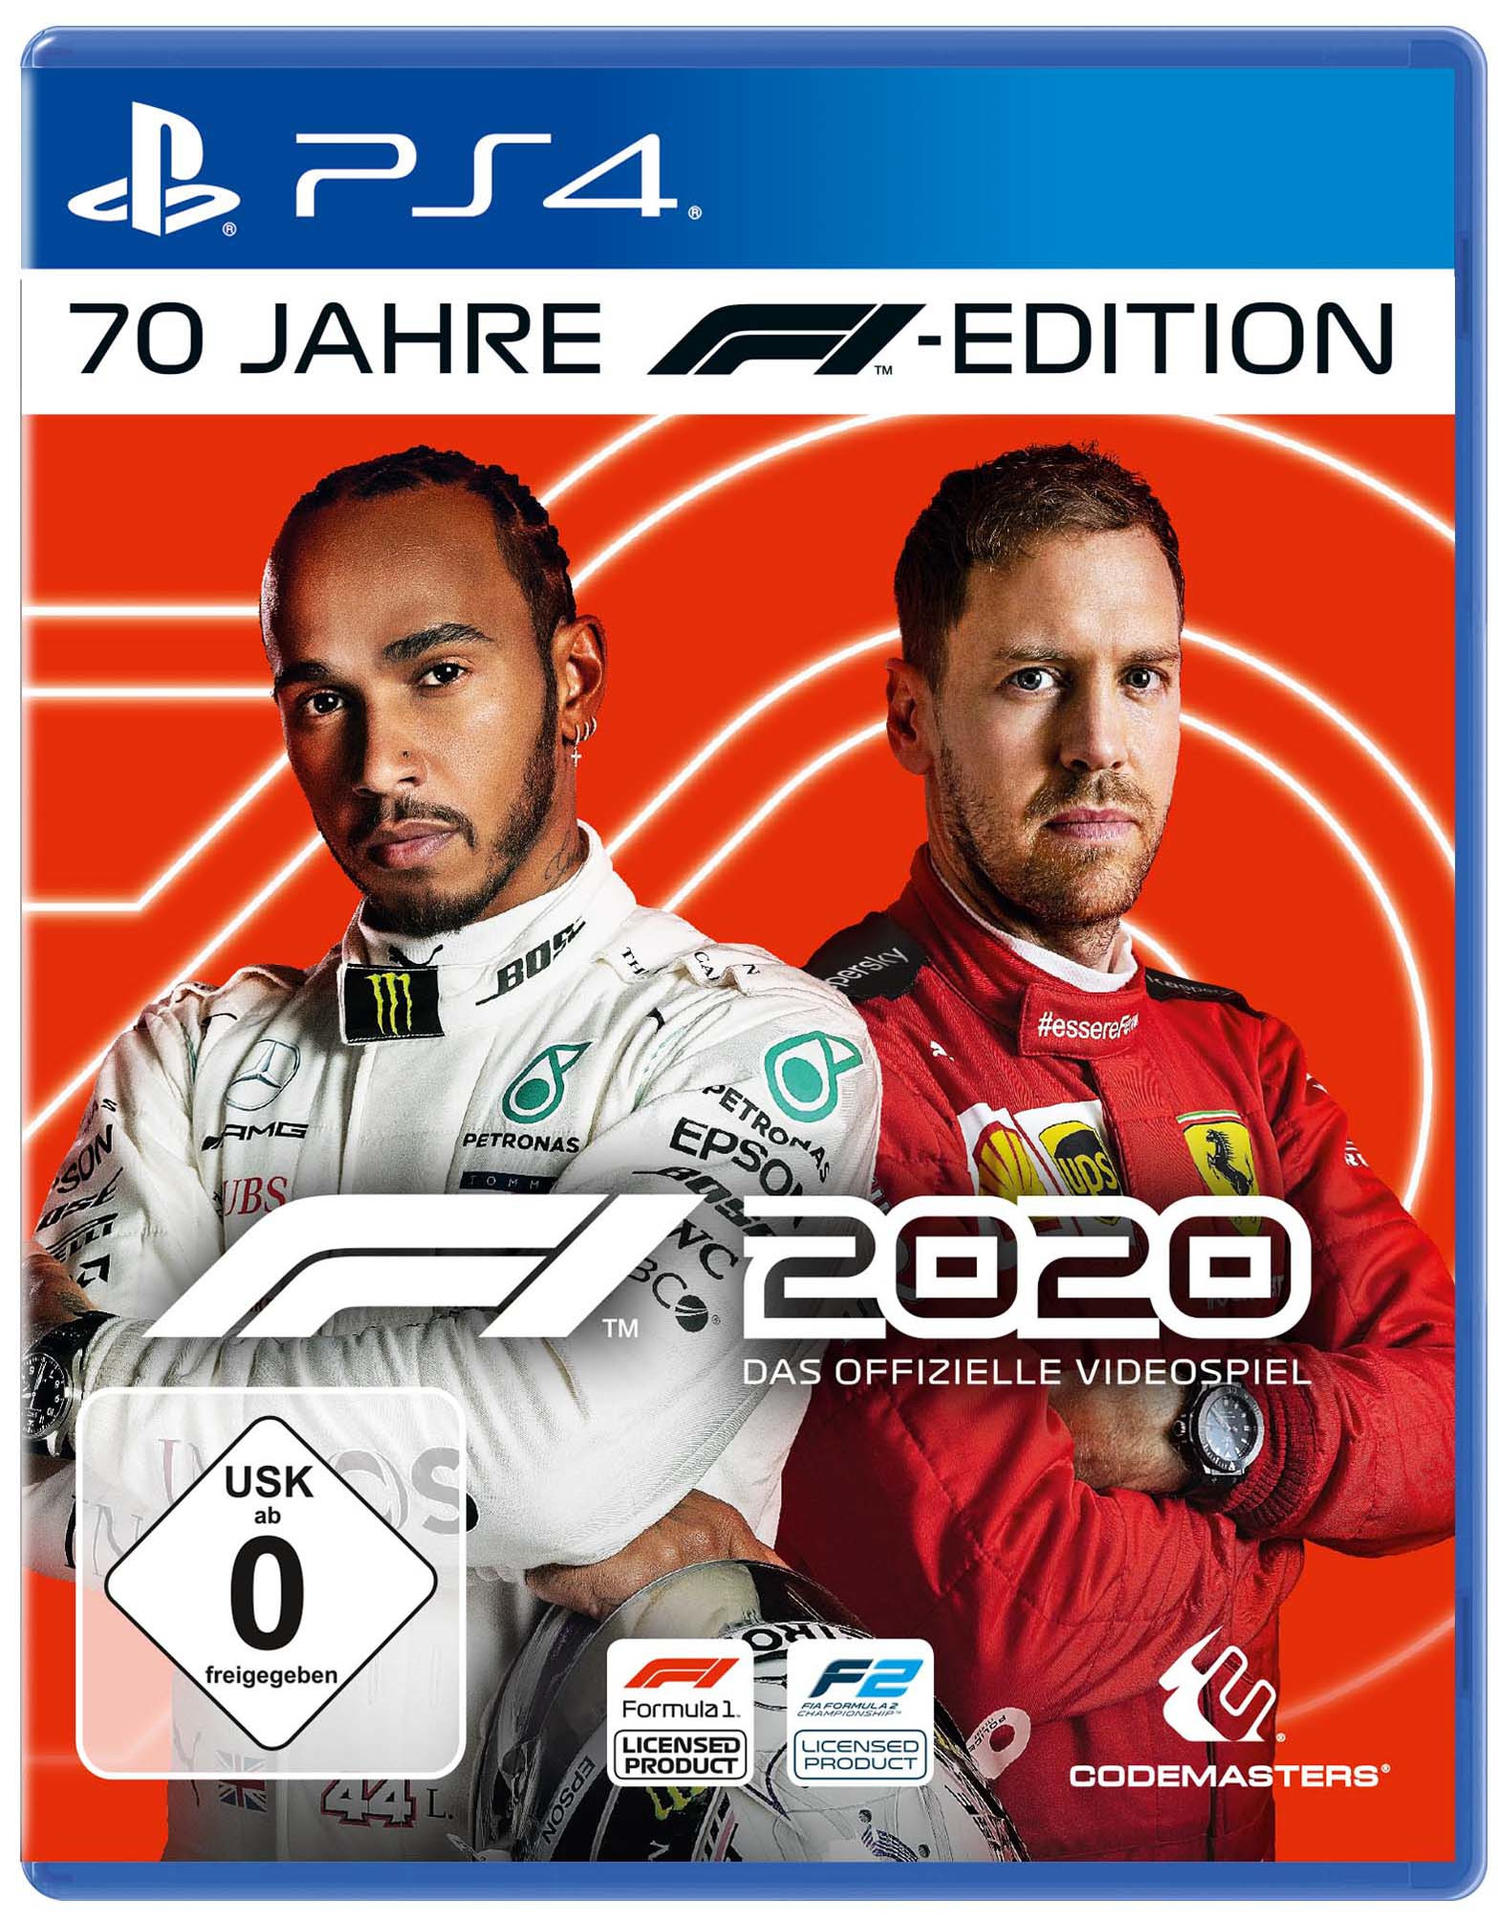 2020 [PlayStation - F1 PS4 4] 70 F1 JAHRE EDITION